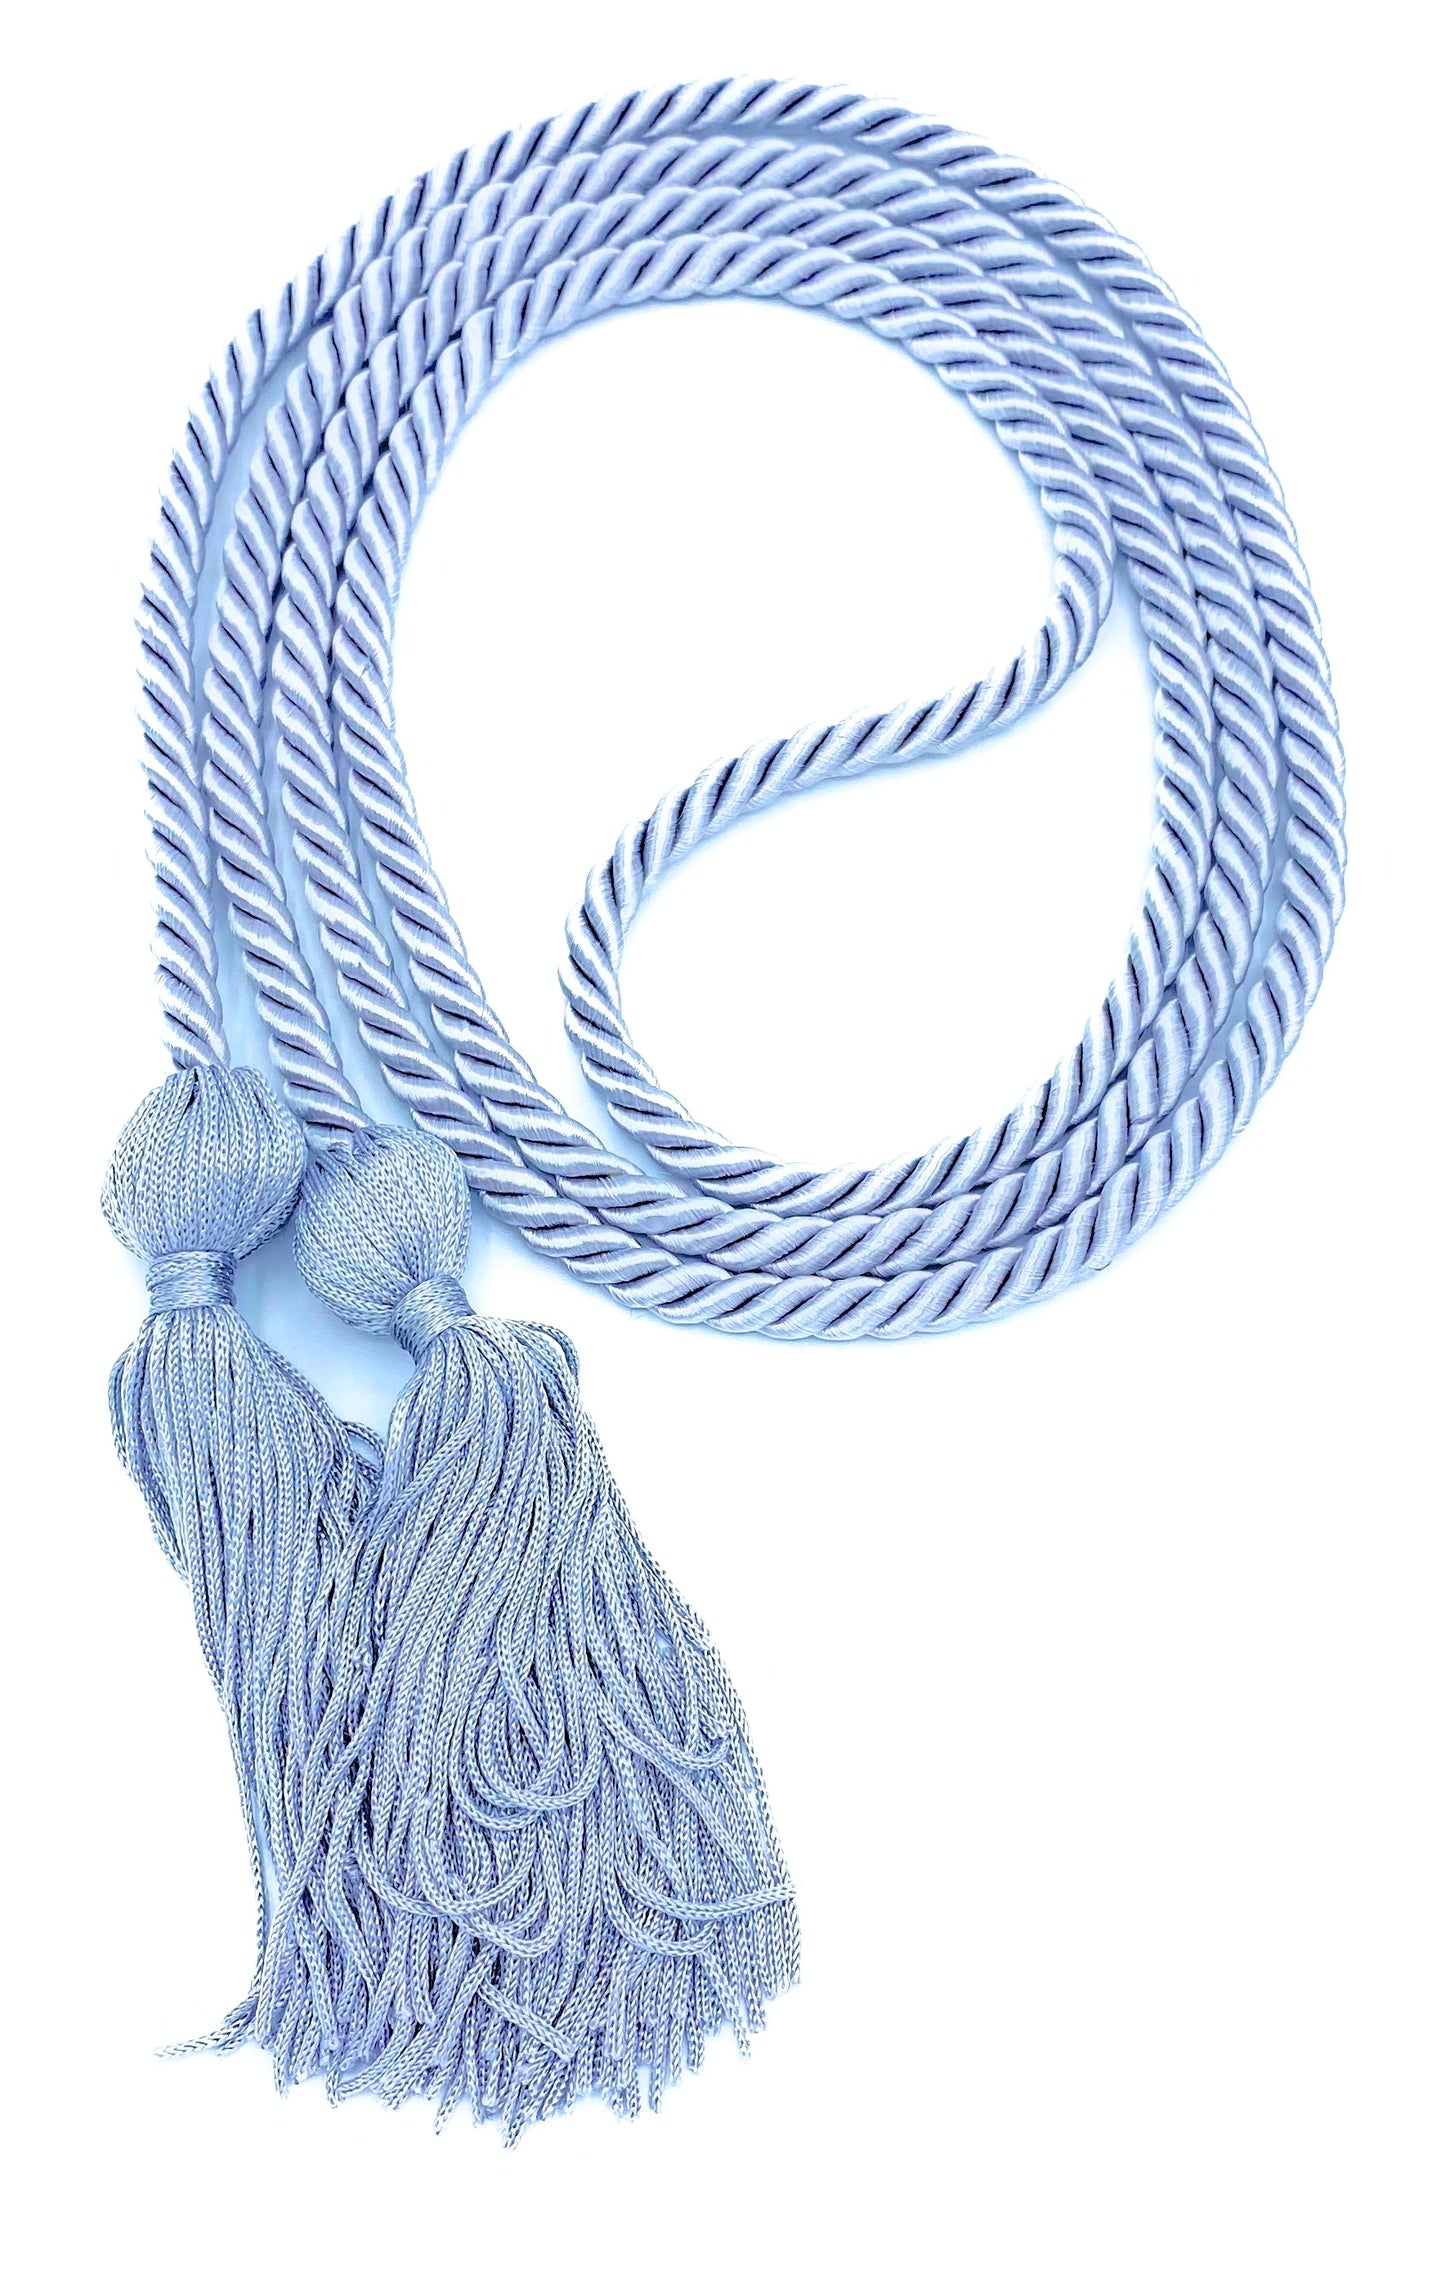 Silver Honor Cords - Honor Cord Source 